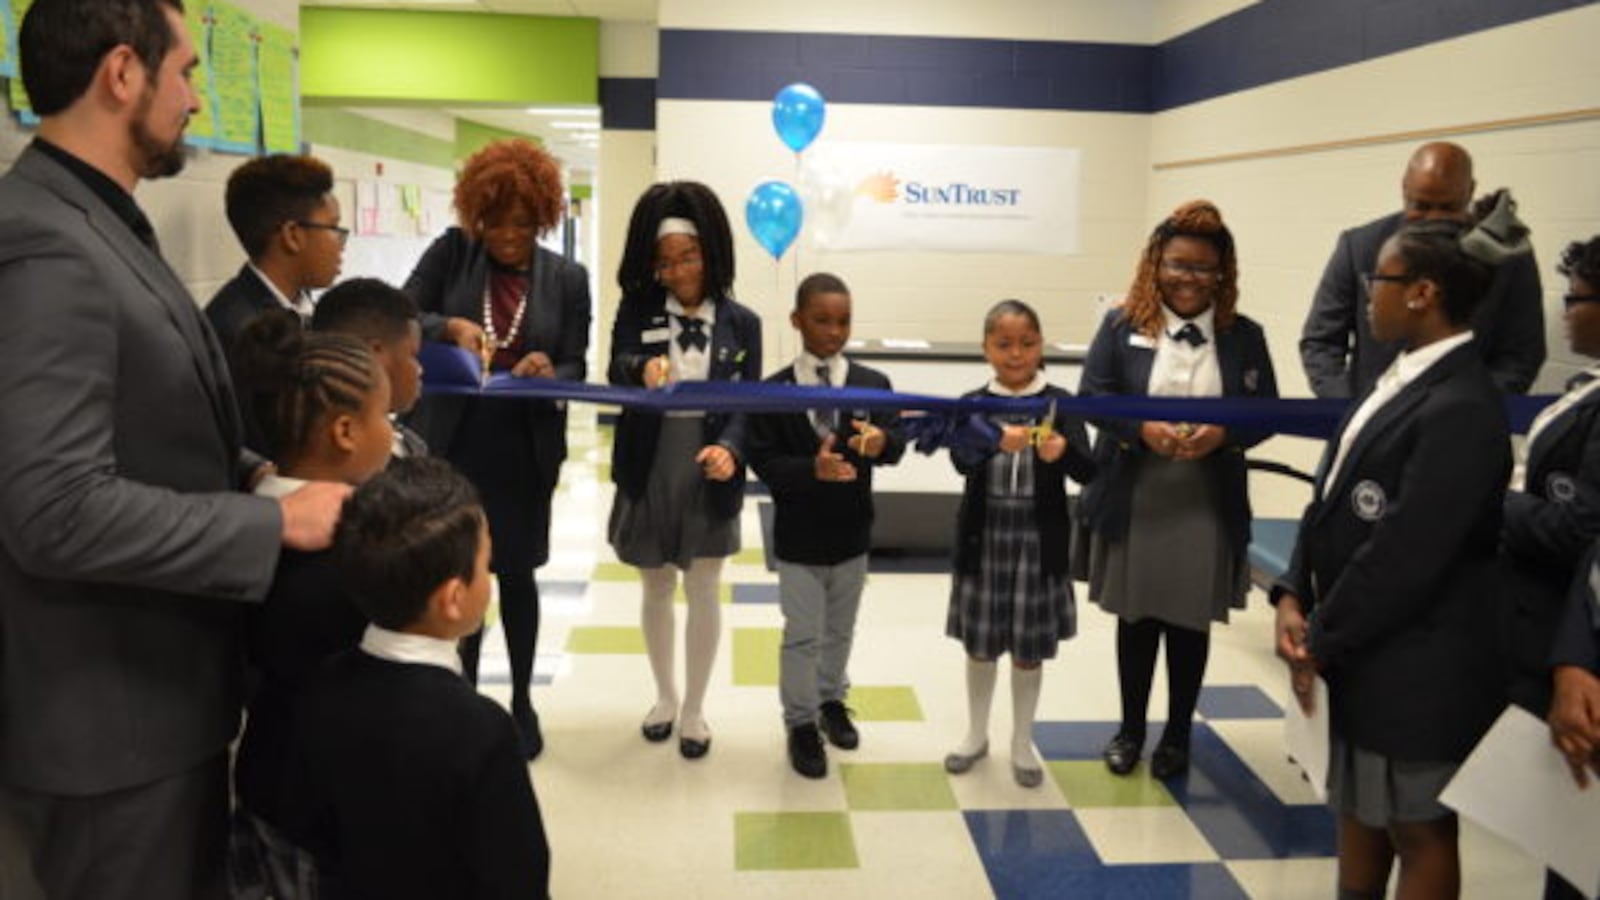 Gestalt Community Schools and SunTrust Banks, Inc. relaunched this week a ‘Youth Bank’ at Gestalt’s Power Center Academy in Hickory Hill. Established to support financial literacy, the program will help students open and maintain a savings account.